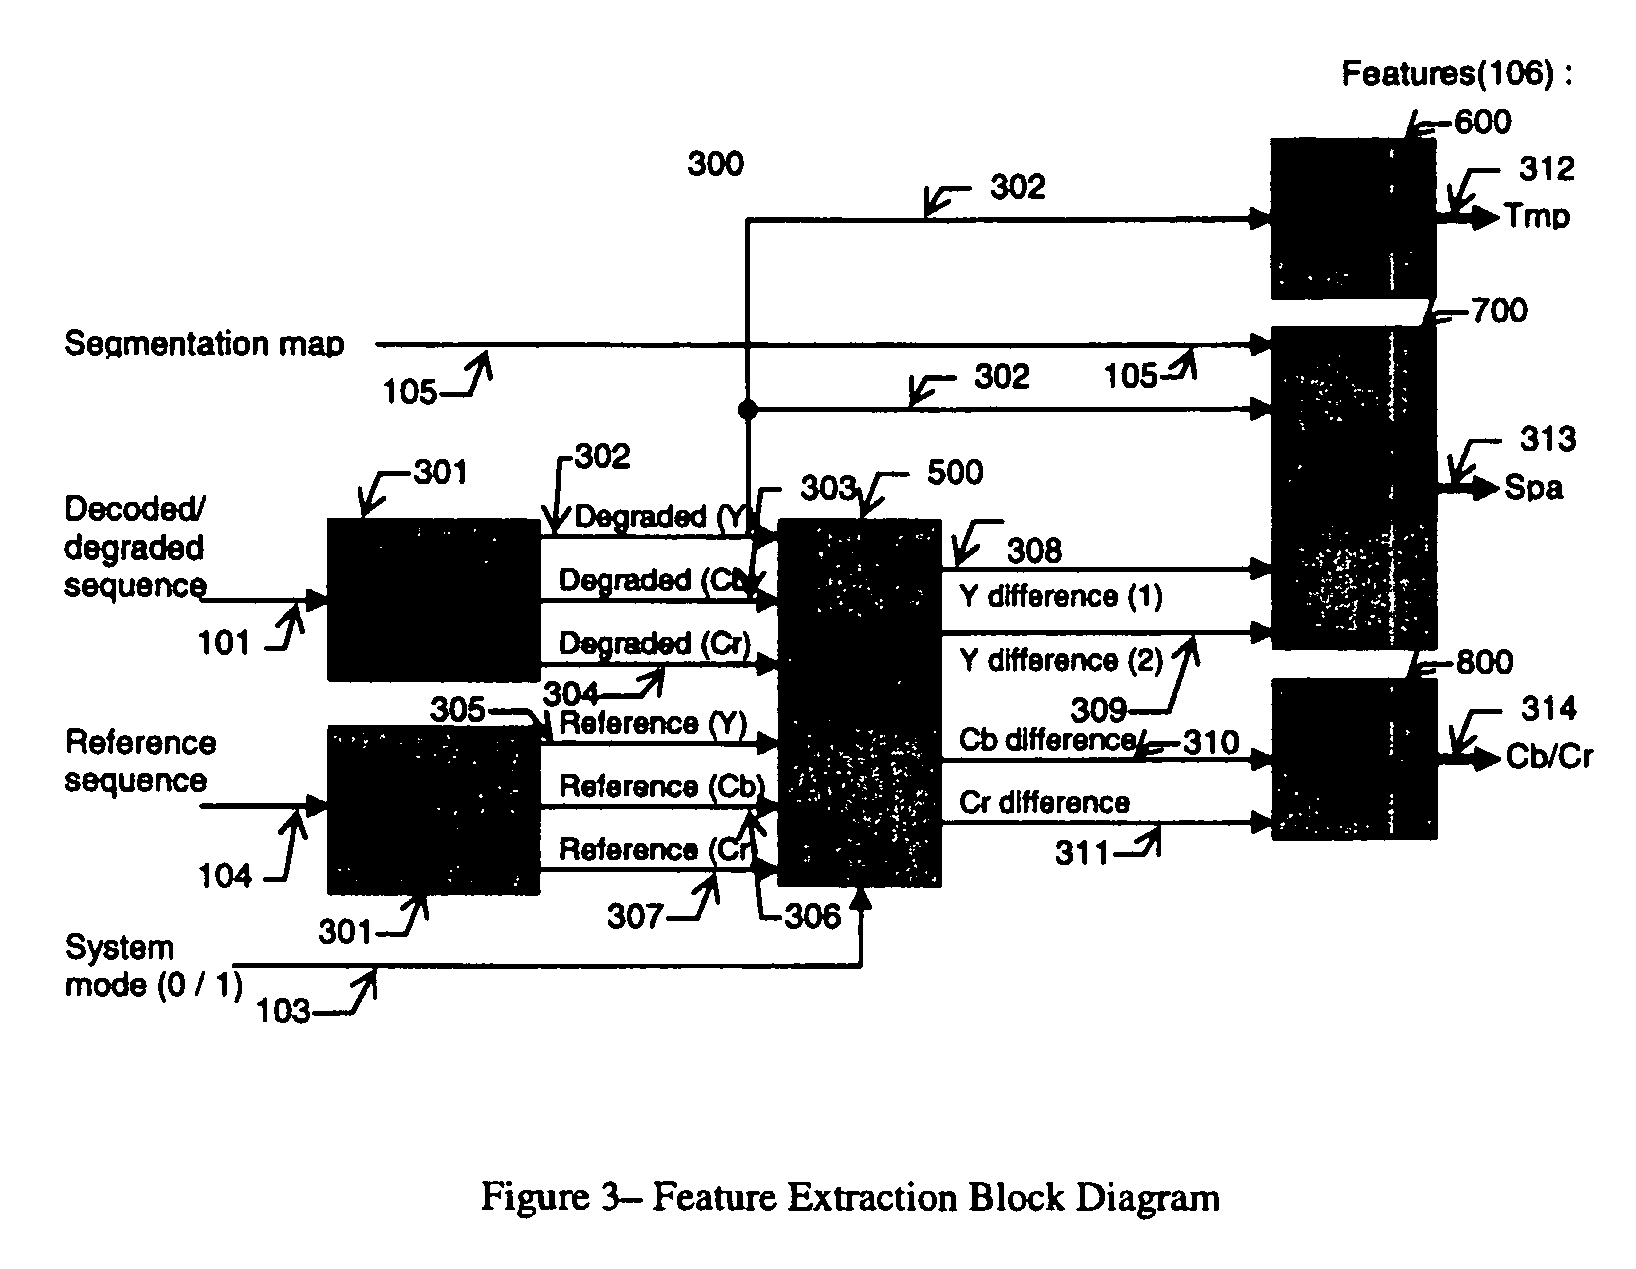 Apparatus and method for objective assessment of DCT-coded video quality with or without an original video sequence